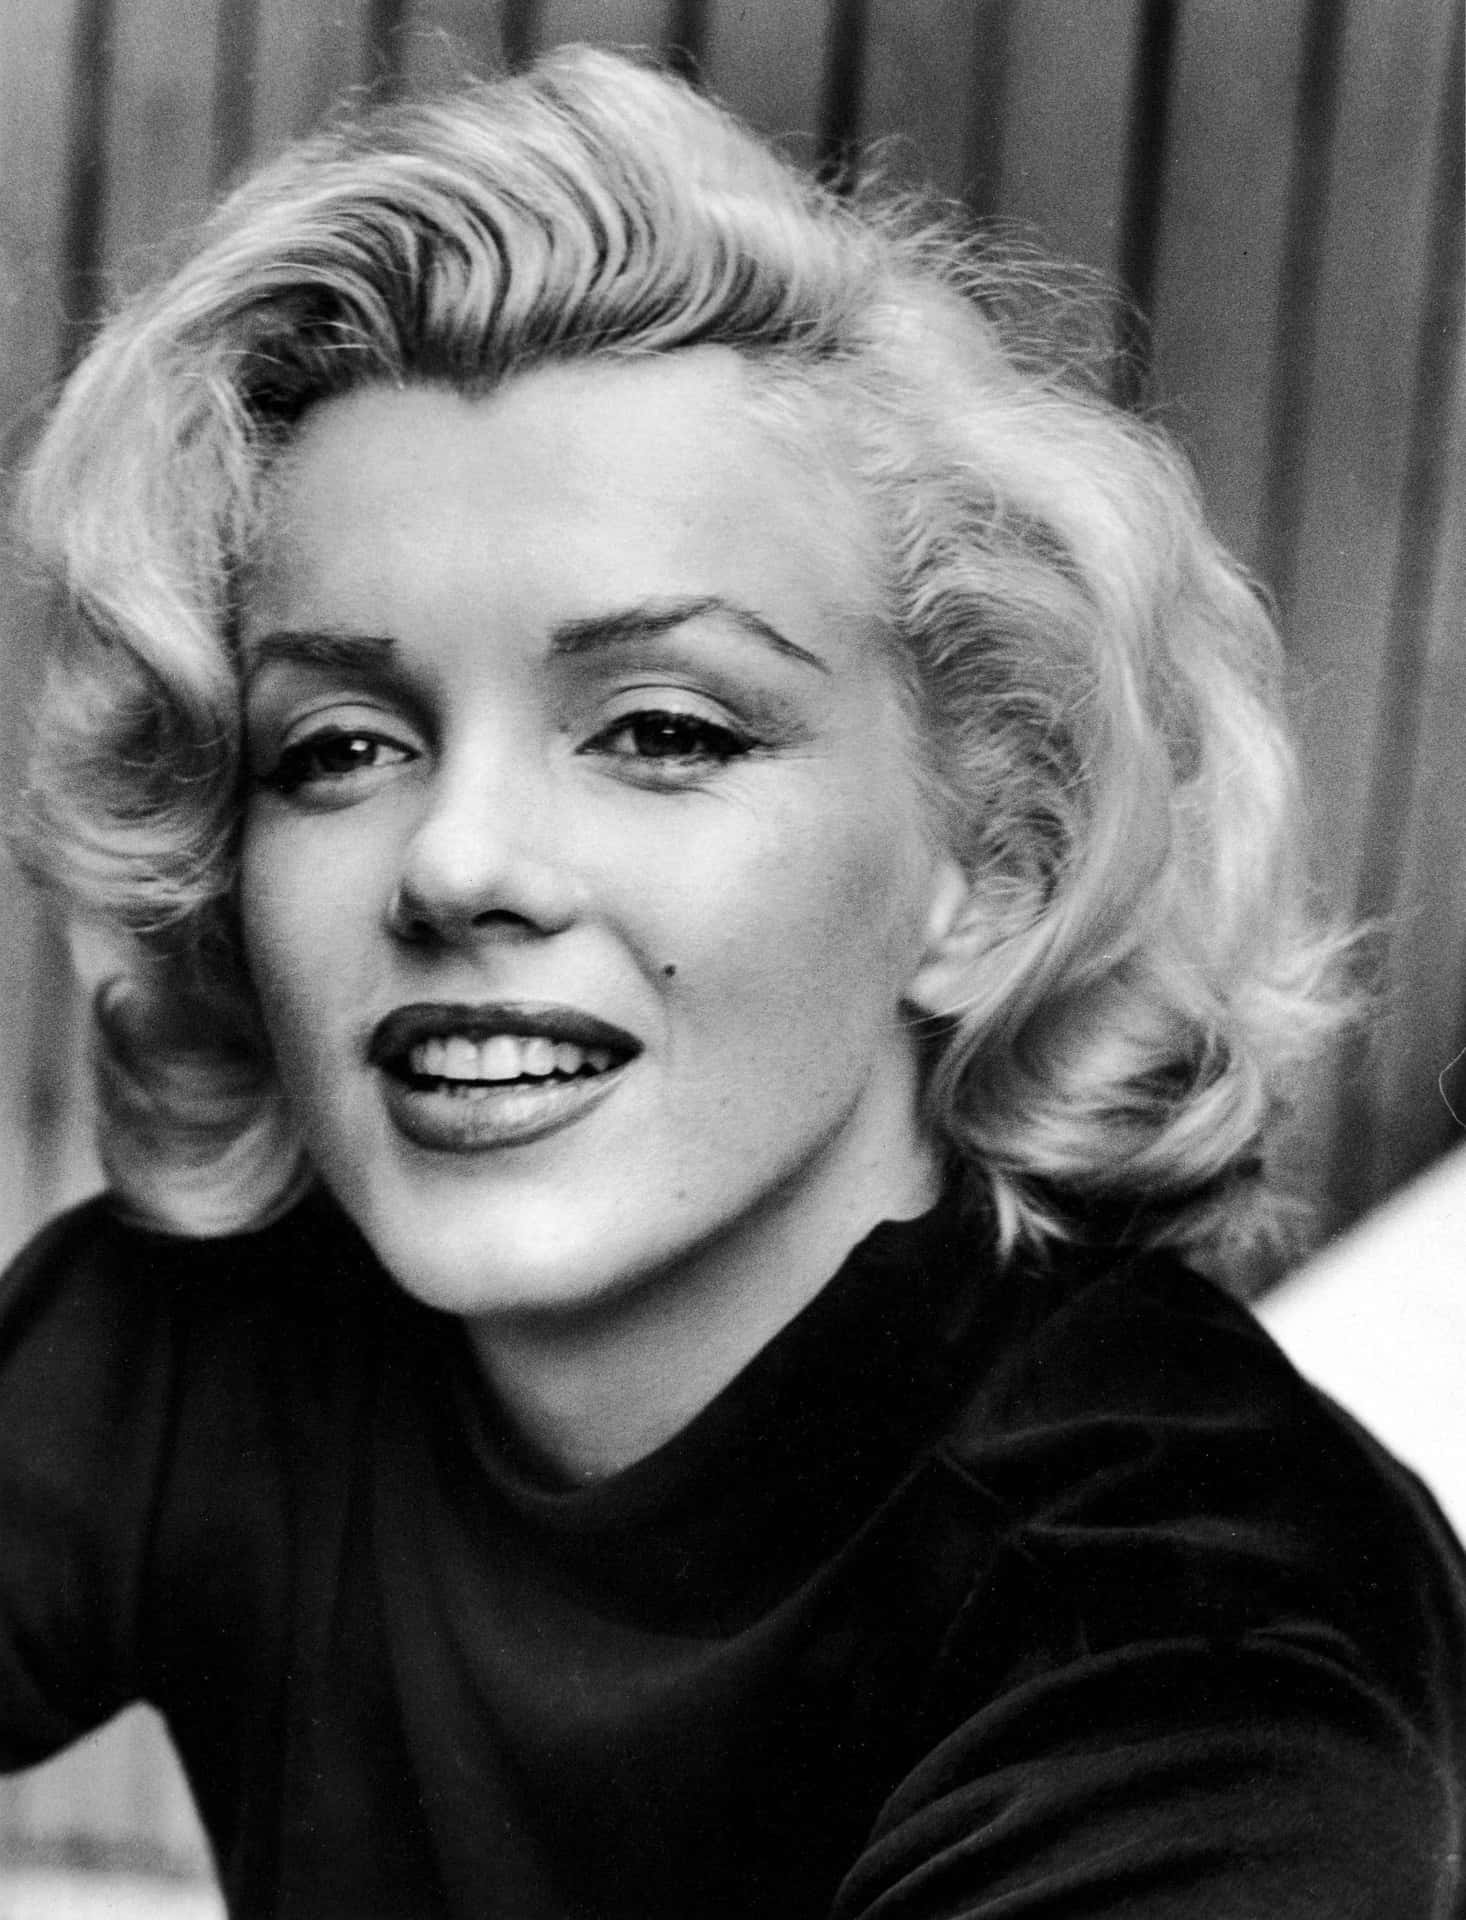 Iconic Hollywood actress Marilyn Monroe, during the height of her career.